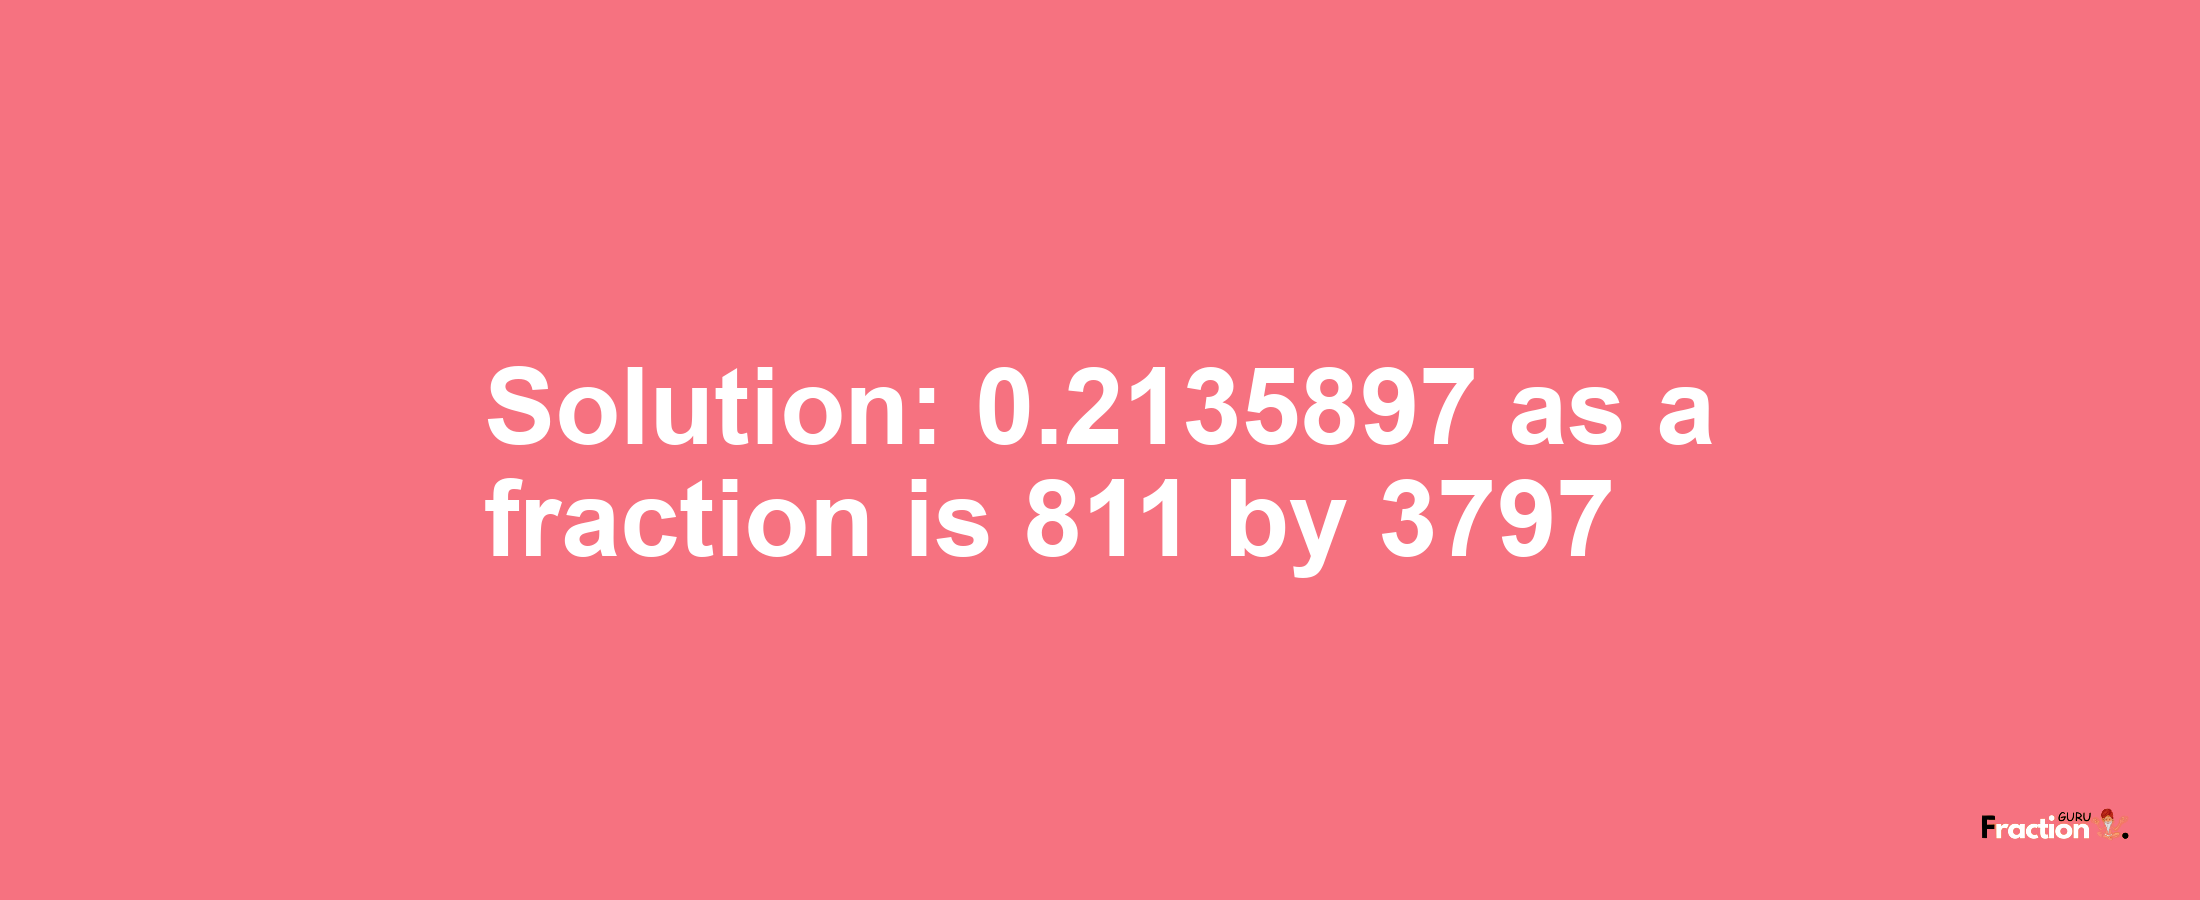 Solution:0.2135897 as a fraction is 811/3797